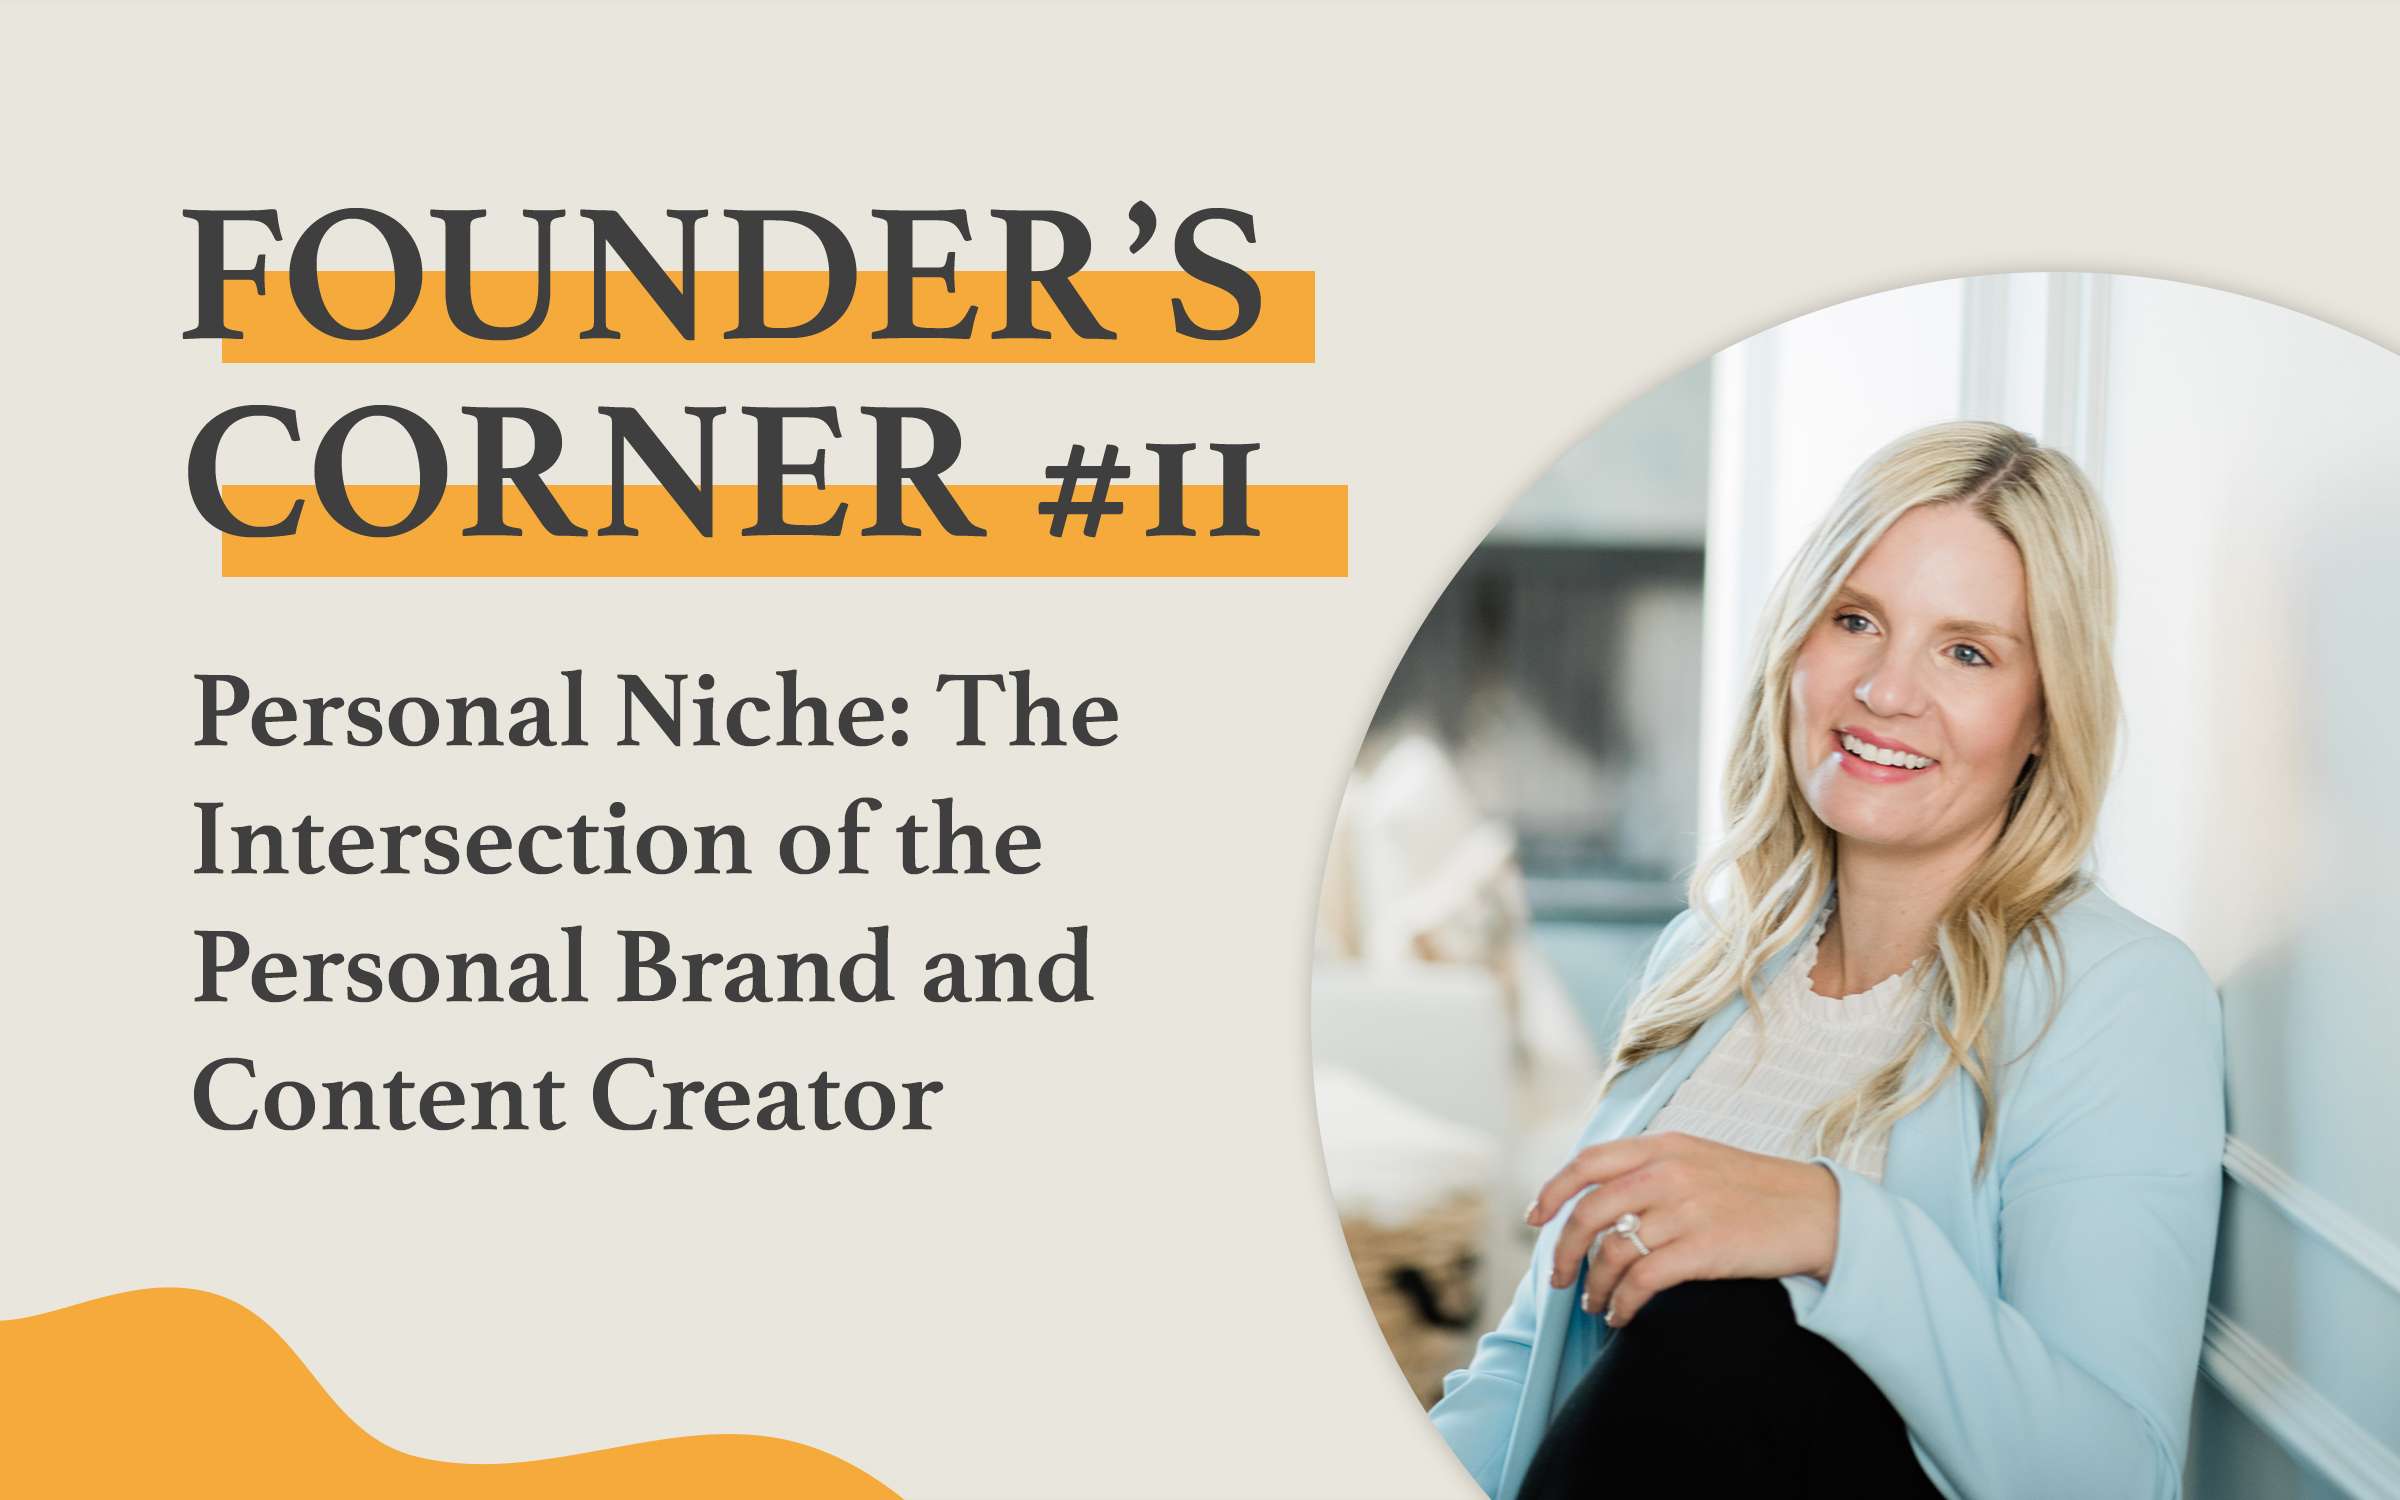 Founder's Corner #11: Personal Niche: The Intersection of the Personal Brand and the Content Creator